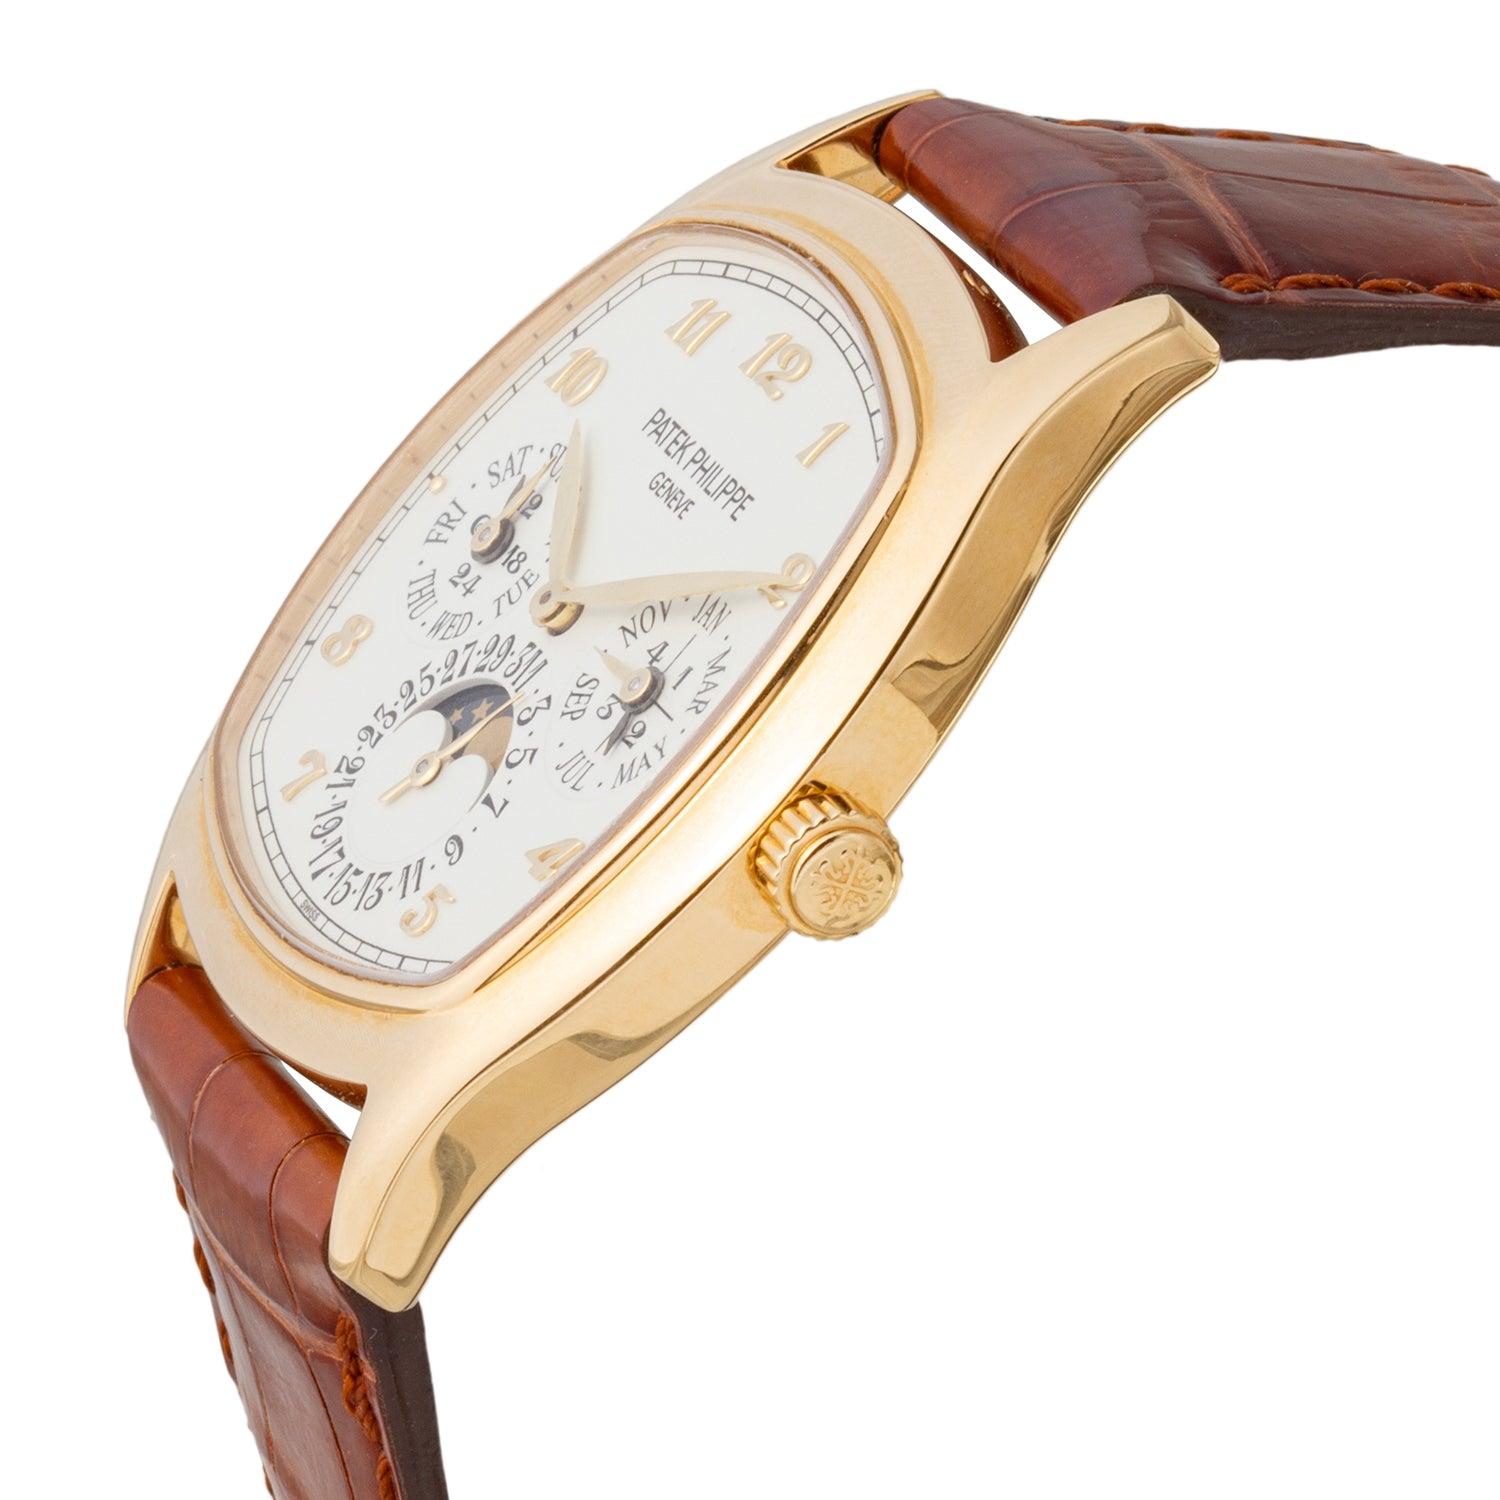 Pre-owned Patek Philippe Perpetual Calendar (ref. 5940J-001), featuring the Caliber 240 Q self-winding automatic movement; grained, cream-colored dial with applied gold Arabic numerals; perpetual calendar complication with displays for the day,